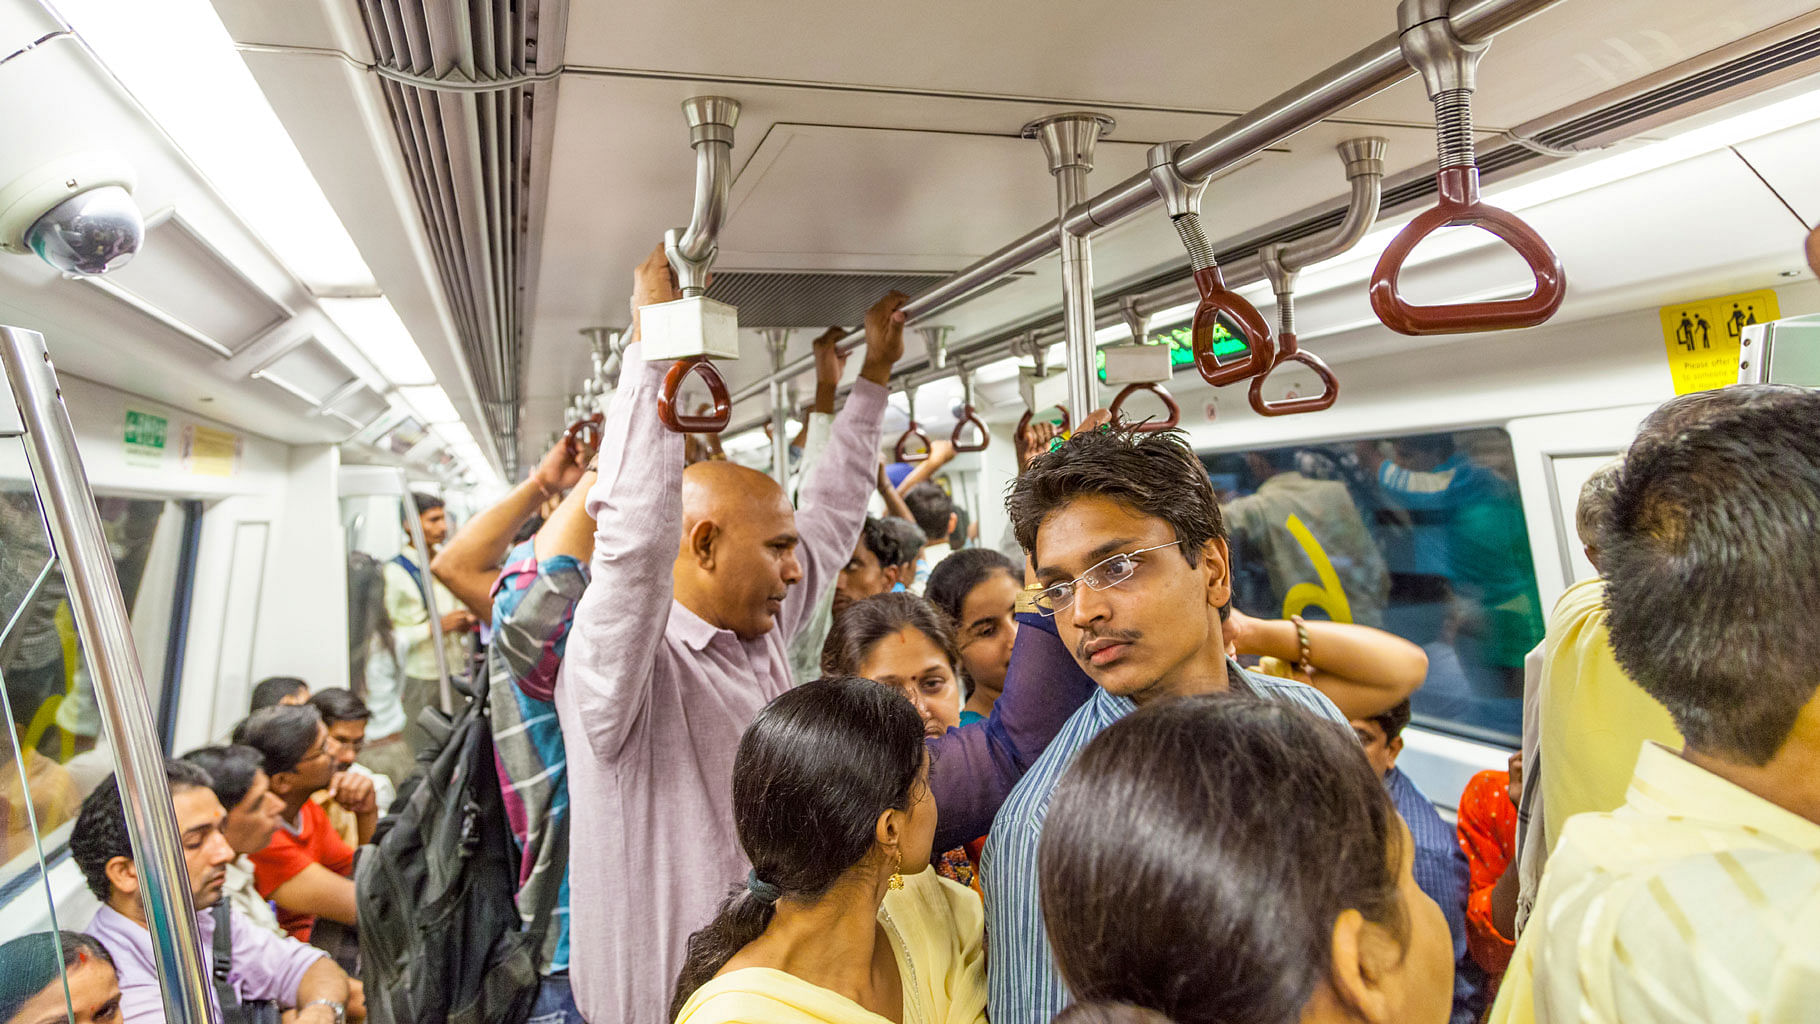 A representational image of a busy metro. (Photo: iStockphoto)